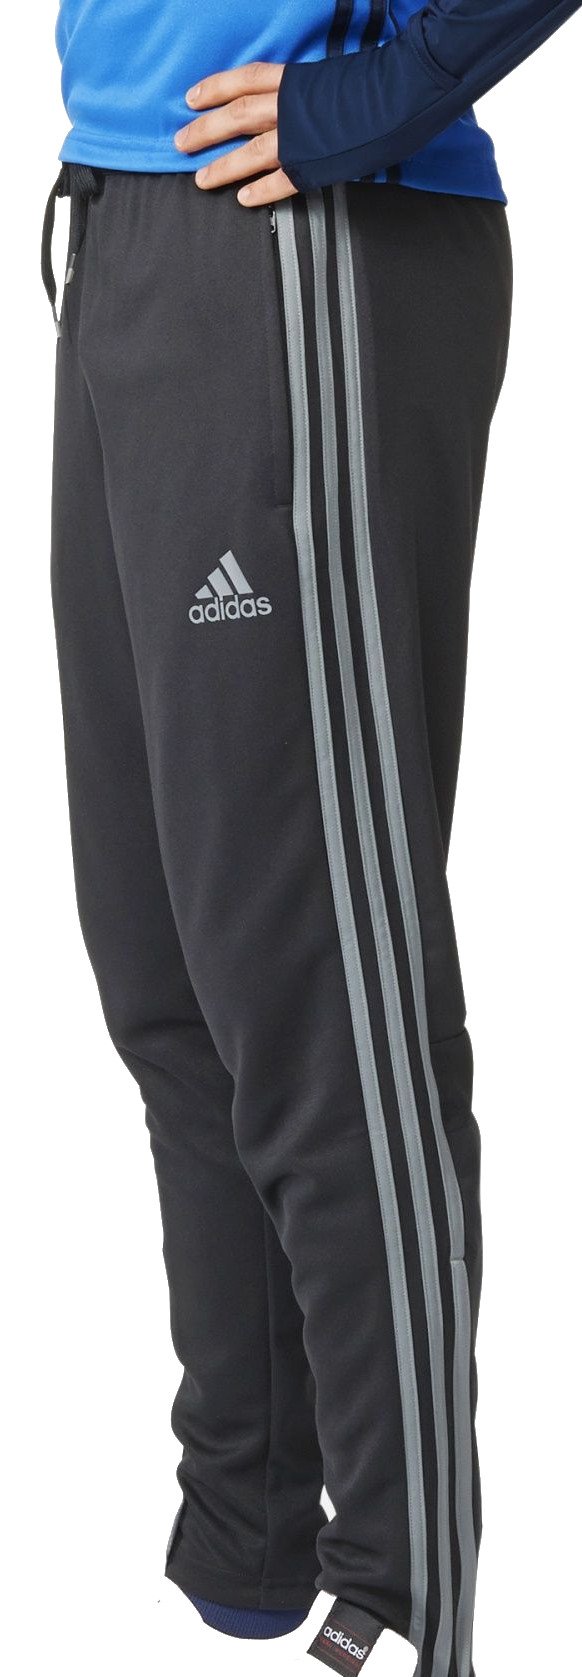 Pants adidas CON16 TRG PNT 